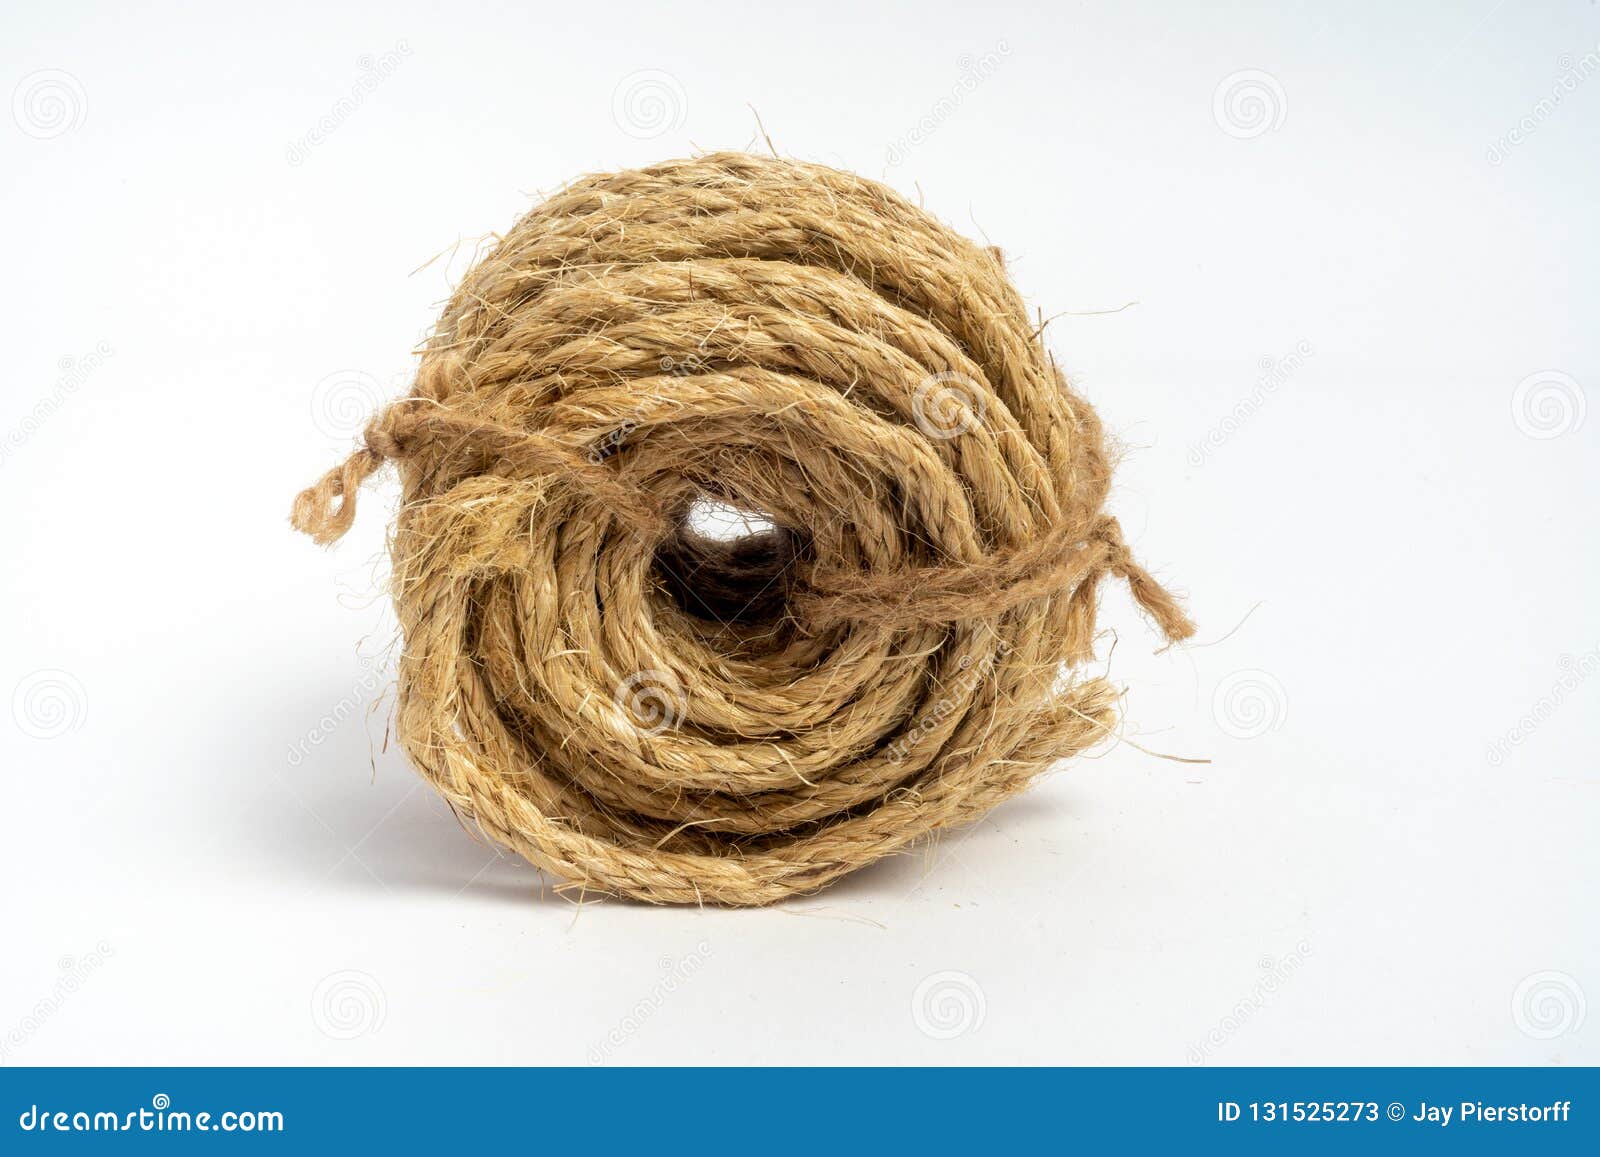 Coil of Fiber Rope Sisal Small on Isolated White Background Stock Image -  Image of hemp, cotton: 131525273